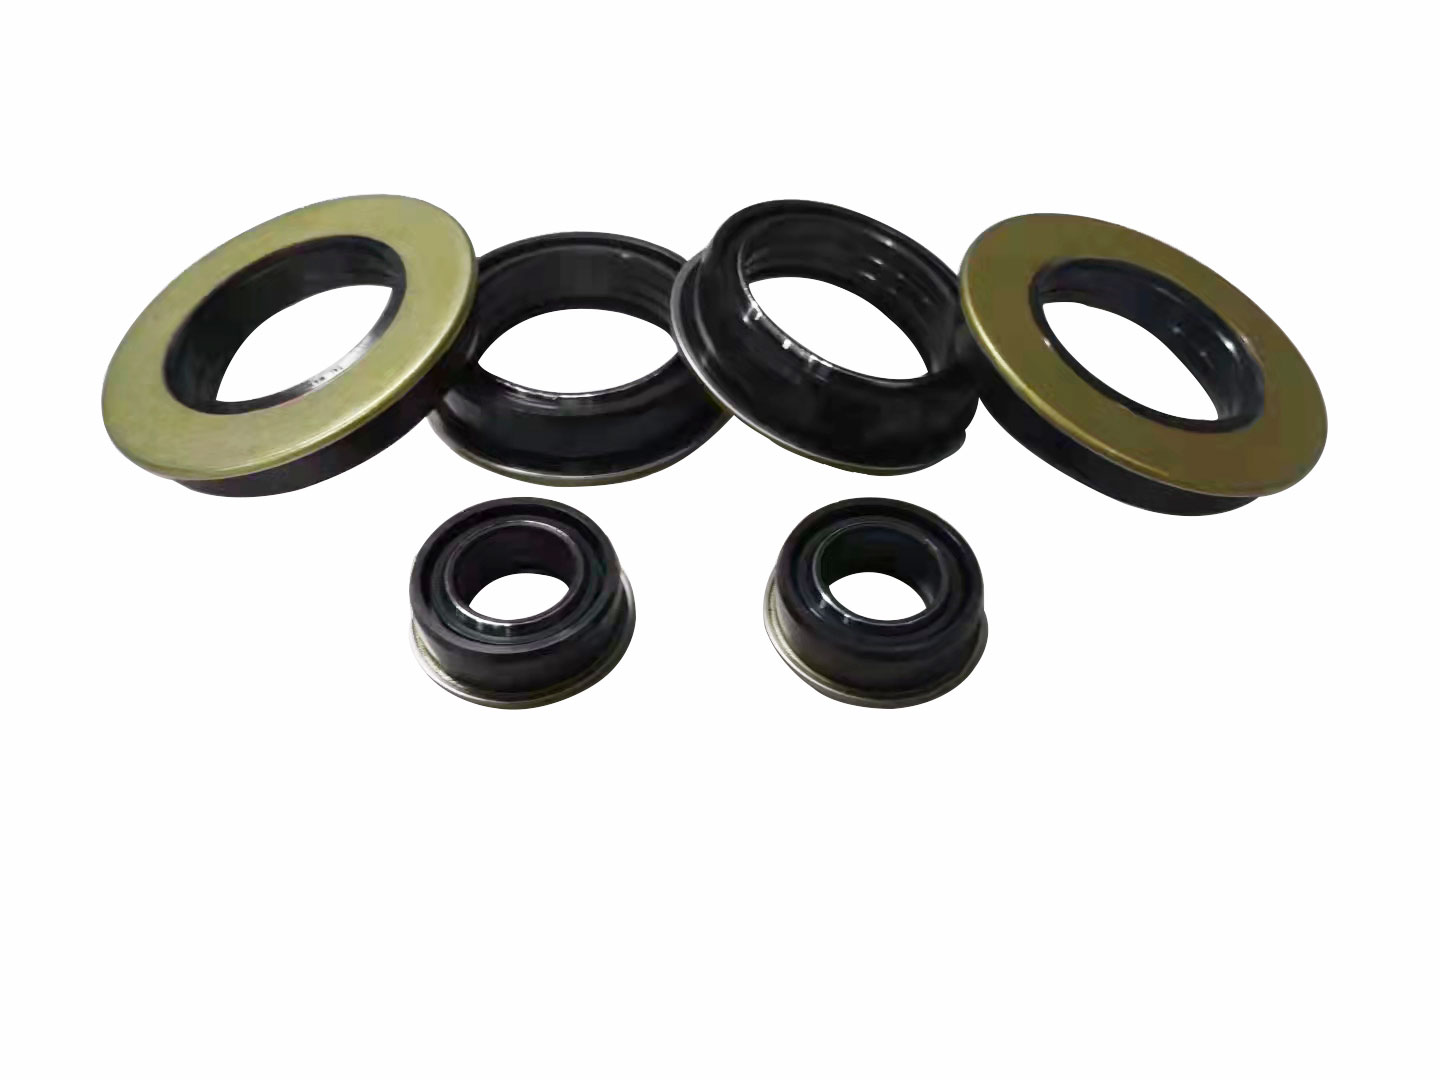 What are the functions of the motor oil seal?